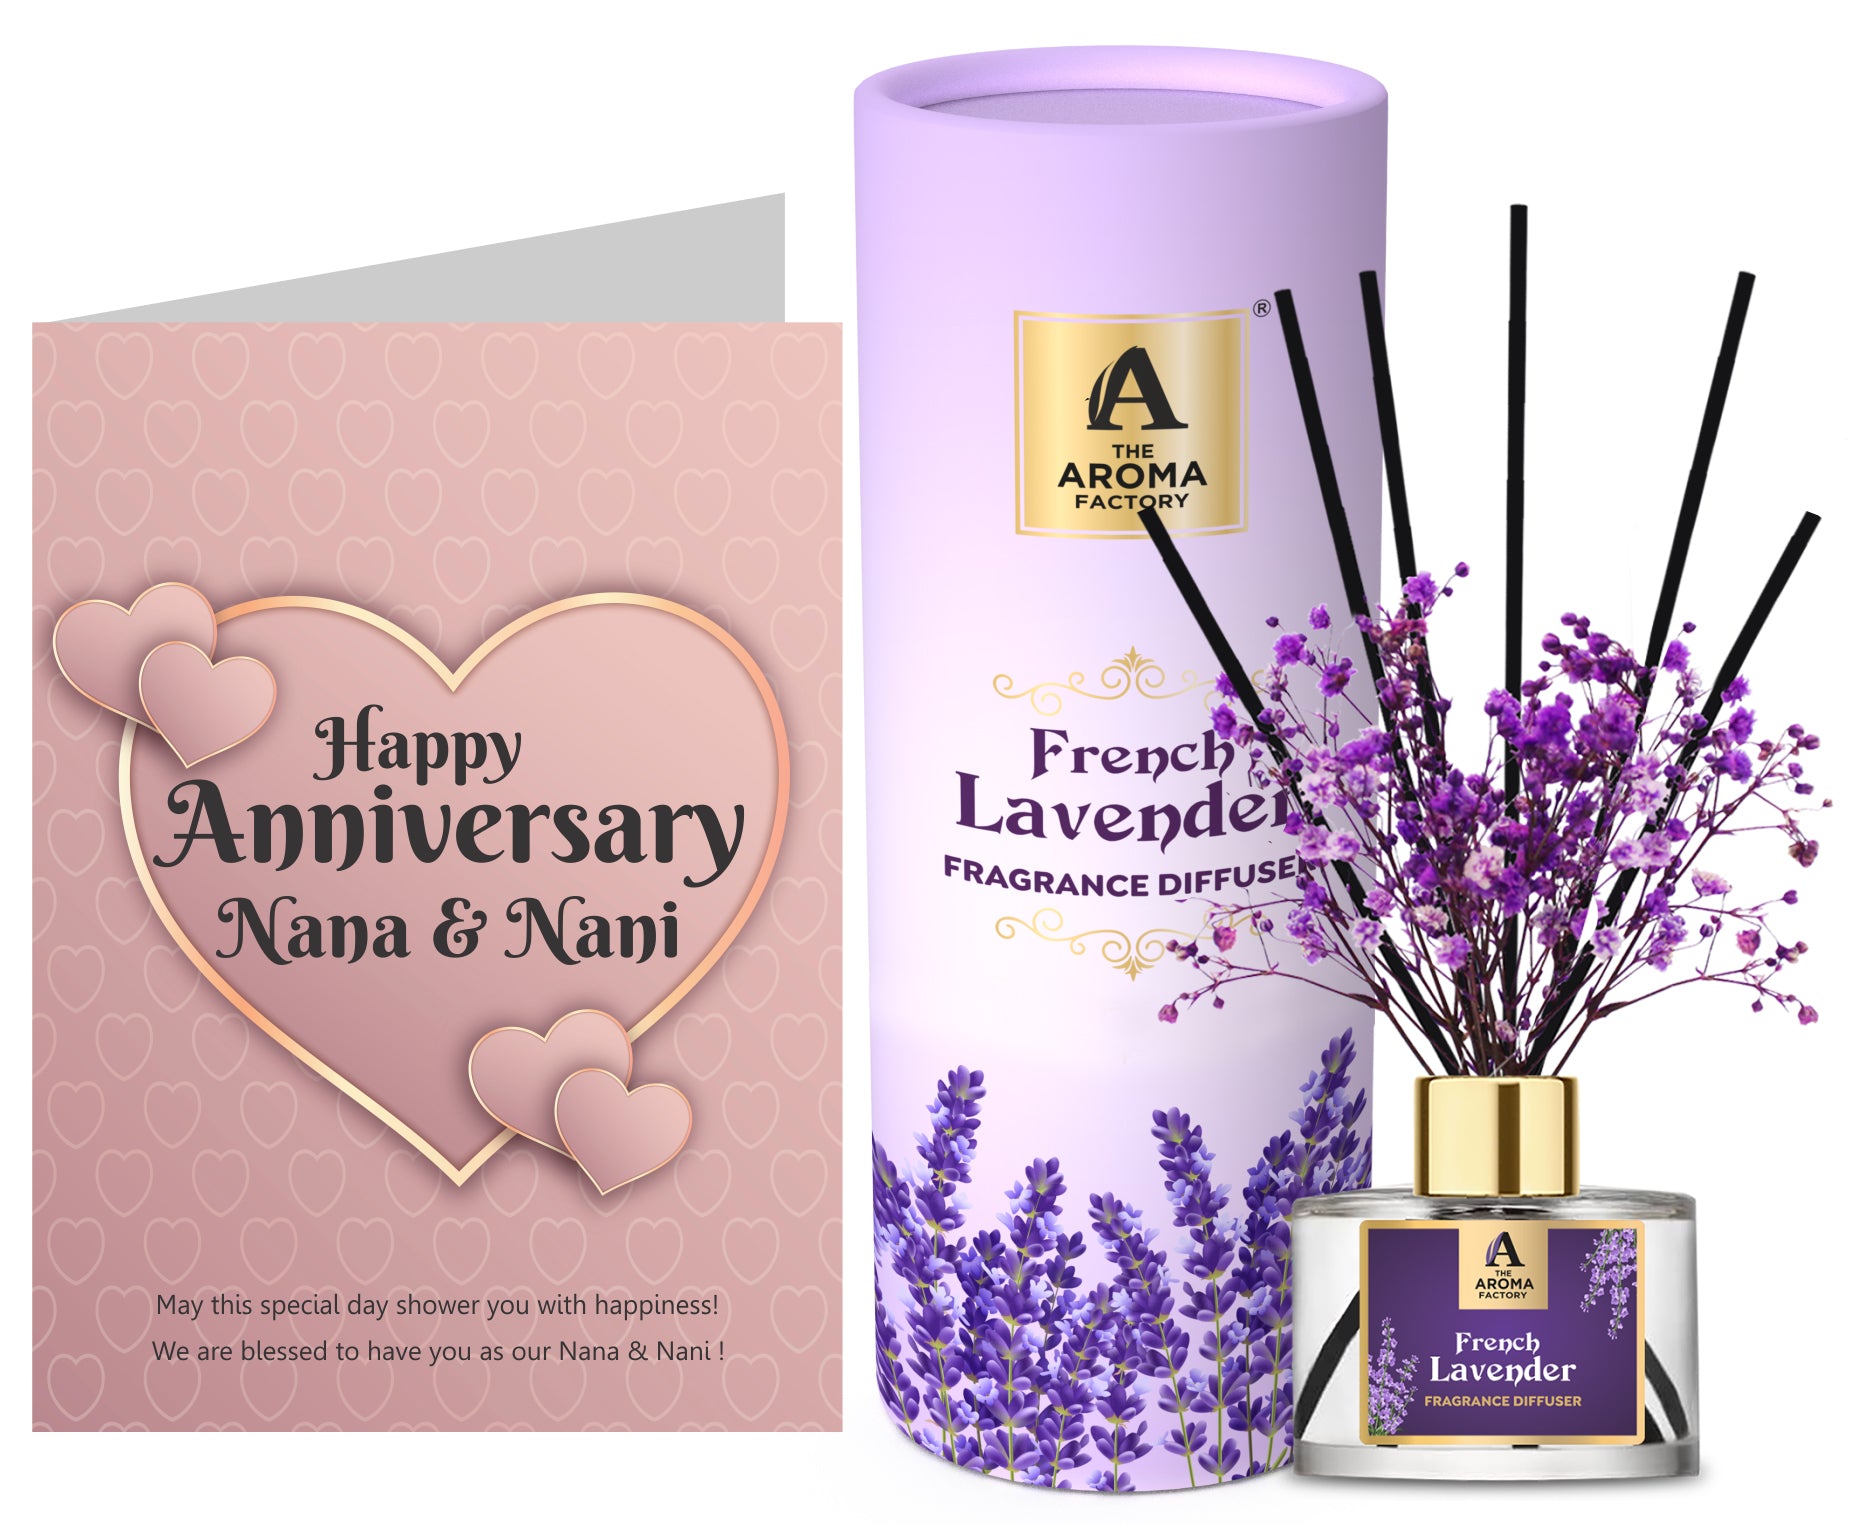 The Aroma Factory Happy Anniversary Nana & Nani Gift with Card, French Lavender Fragrance Reed Diffuser Set (1 Box + 1 Card)